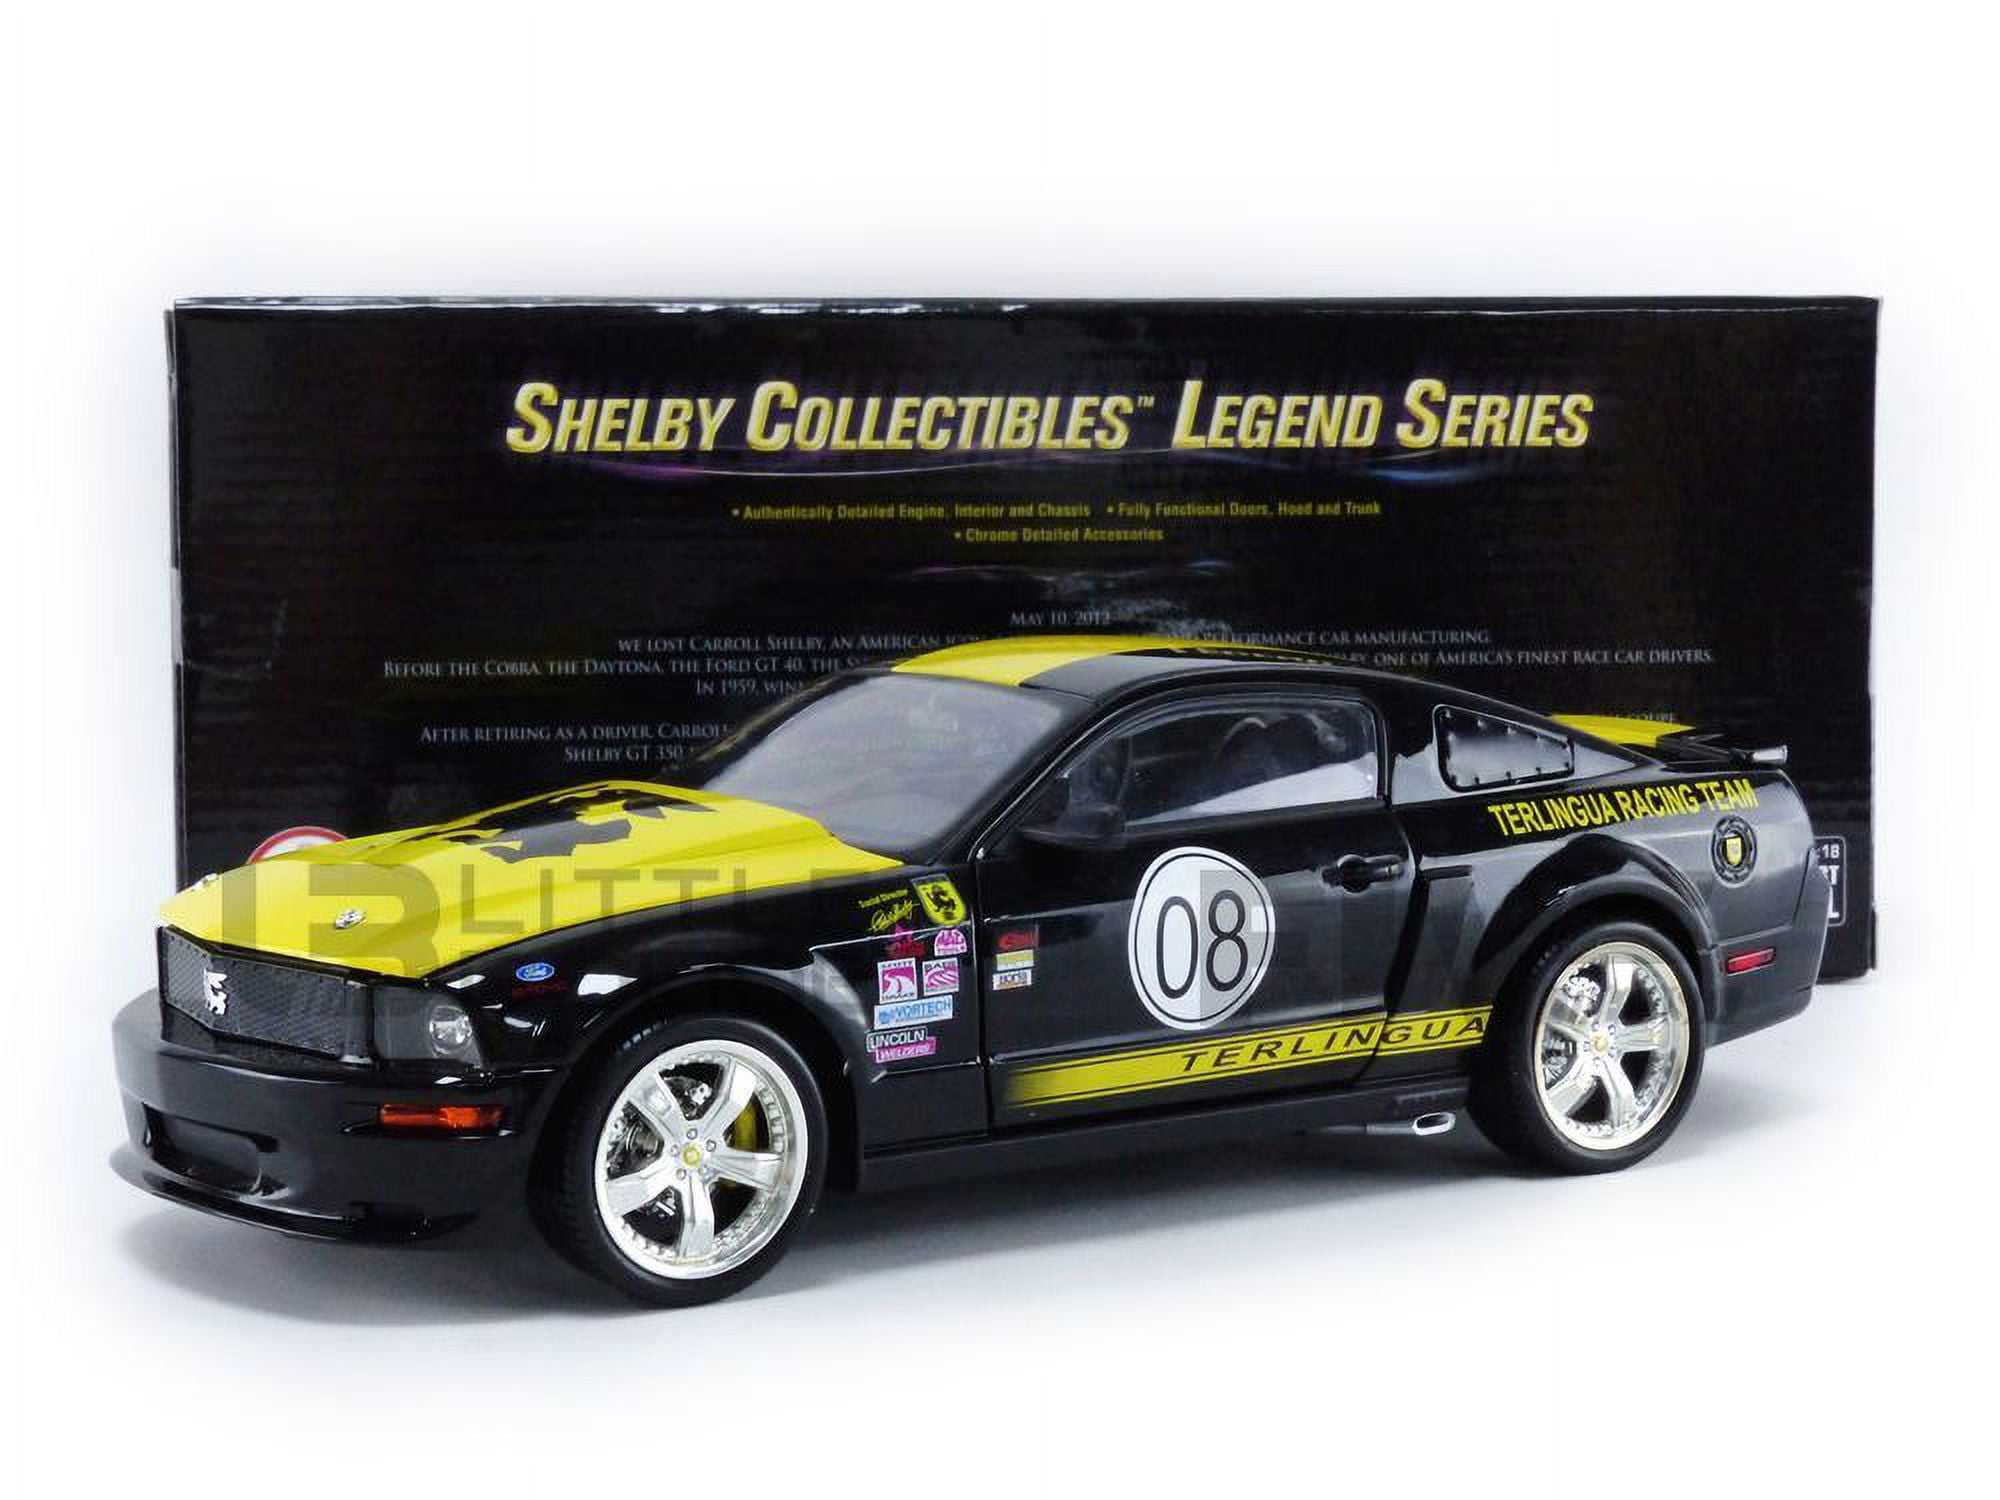 Picture of Shelby Collectibles SC296 Series 1-18 Diecast Model Car with No. 08 Terlingua Shelby Collectibles Legend for 2008 Ford Shelby Mustang&#44; Black & Yellow